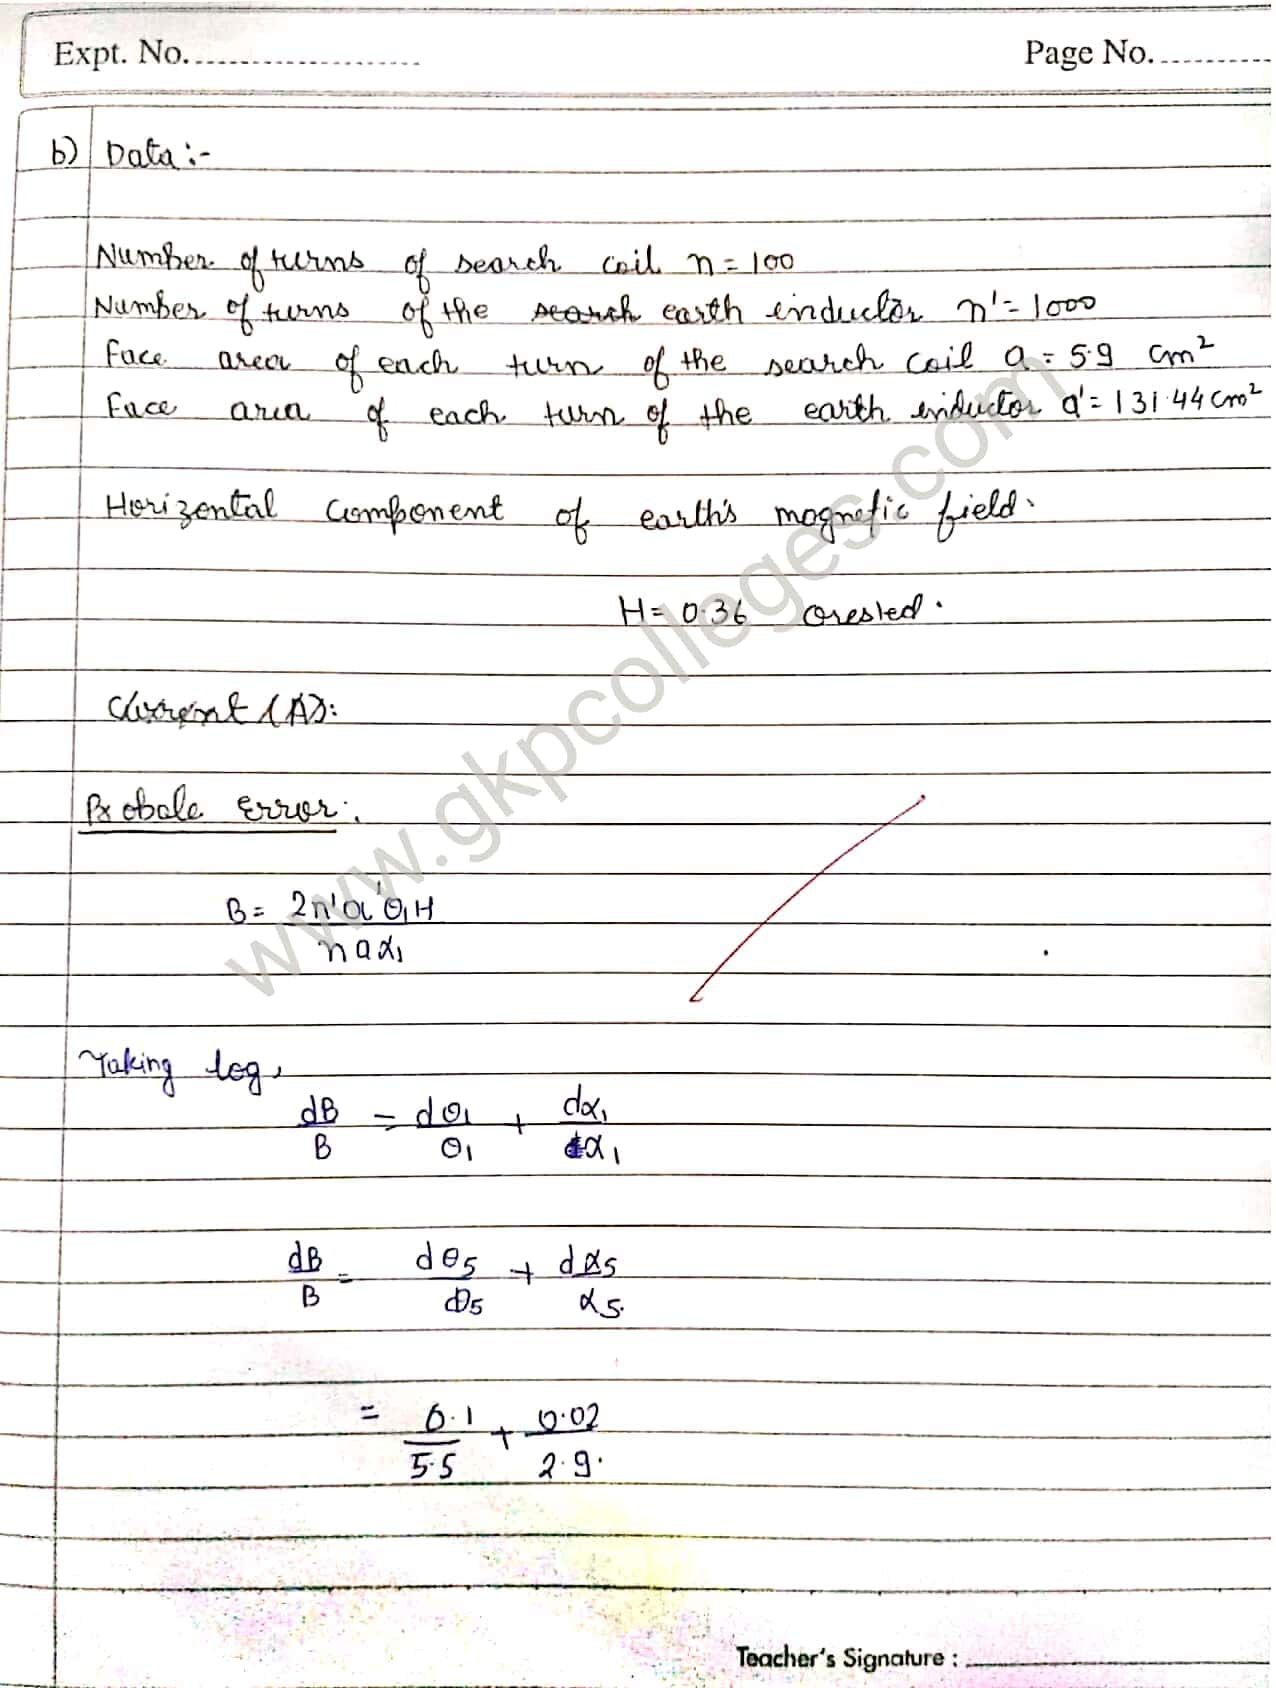 Physics(Electronics) Practical Notes of B.Sc. 2nd Year Student for DDU and St. Andrew's PG College, Gorakhpur